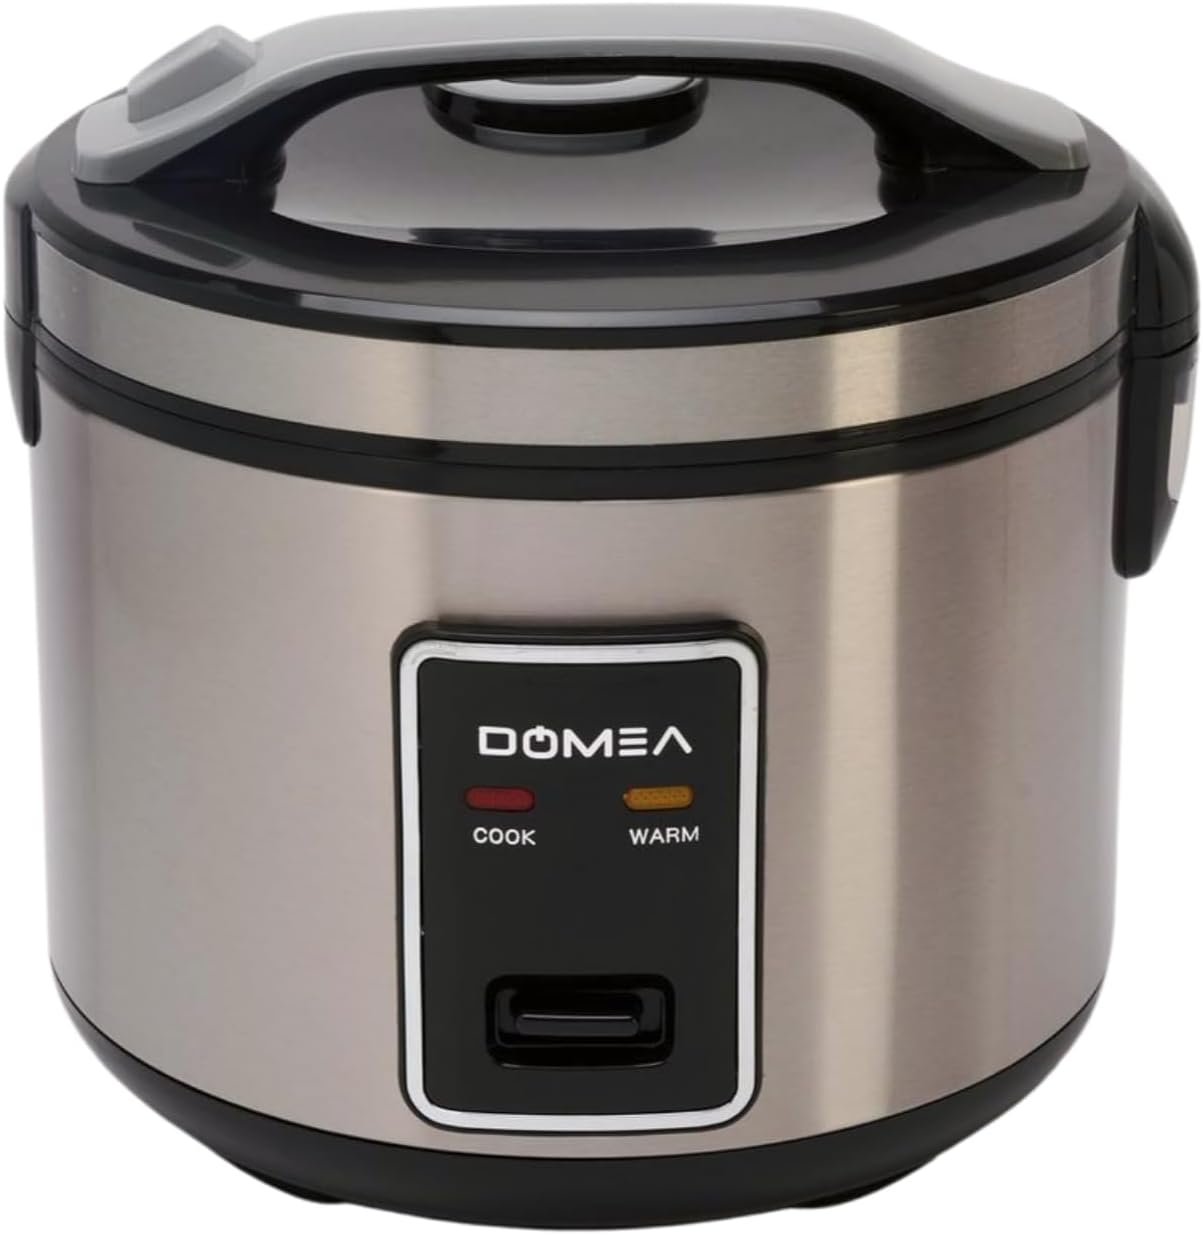 Domea 2-in-1 electric rice cooker, 1.8 l capacity, non-stick cooking pot with food steamer basket, warm/cook light functions, 700 watts